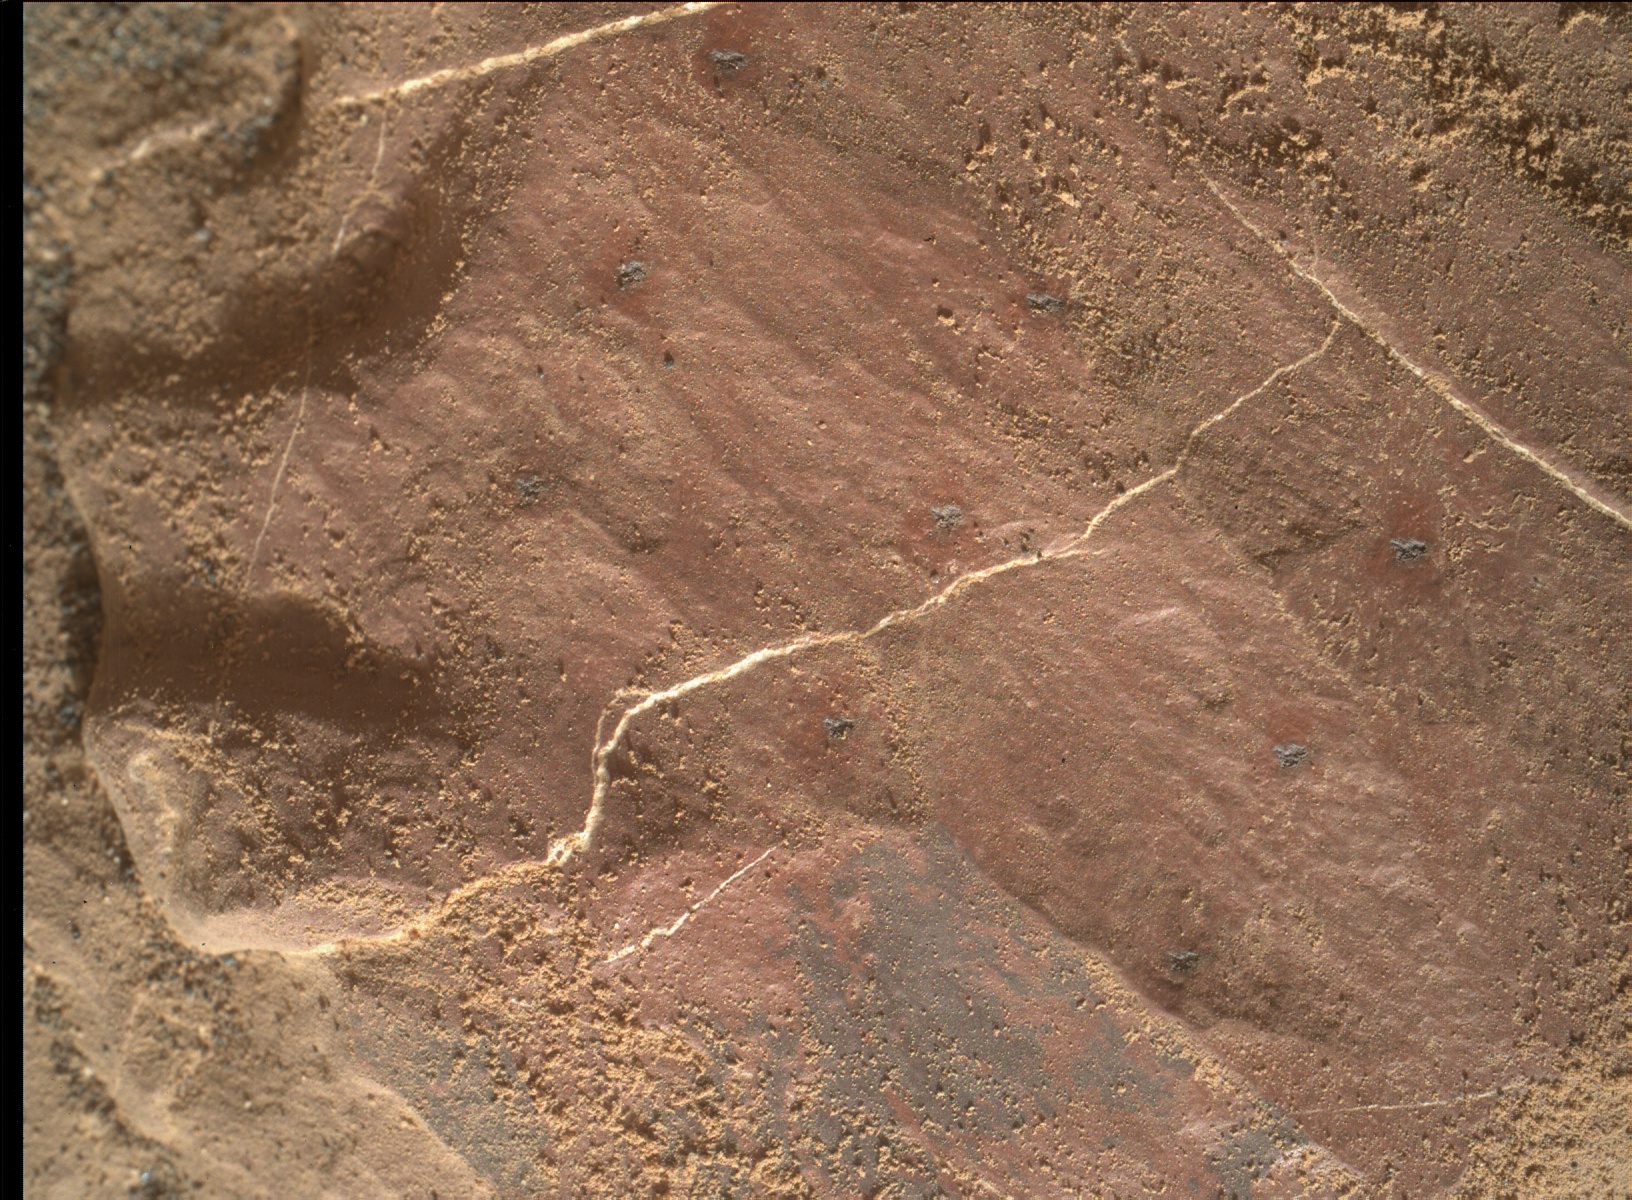 Nasa's Mars rover Curiosity acquired this image using its Mars Hand Lens Imager (MAHLI) on Sol 2029